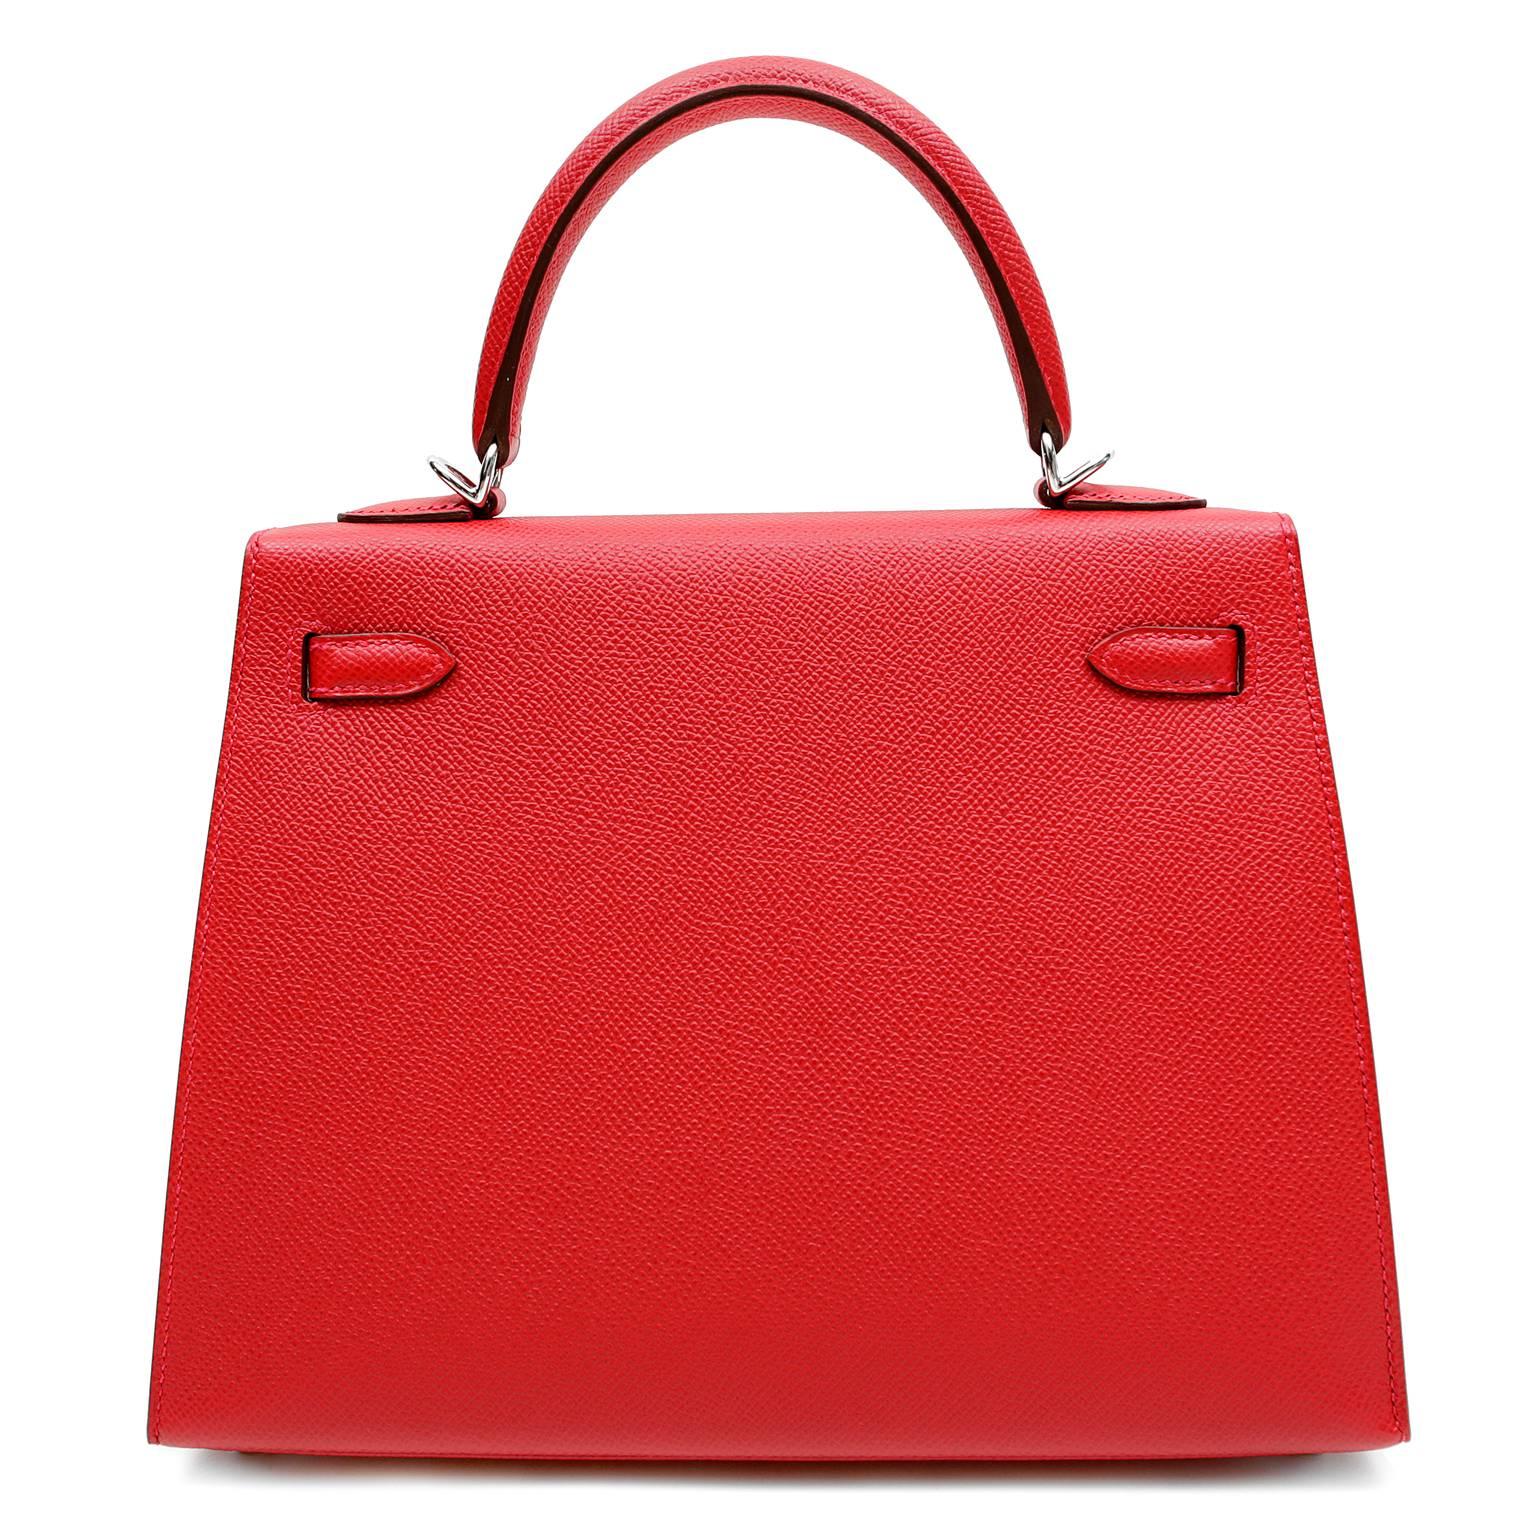 Hermès Rouge Casaque Epsom 25 cm Kelly Sellier- PRISTINE: Never Carried
  Store fresh with the protective plastic intact on all hardware.
  Hermès bags are considered the ultimate luxury item worldwide.  Each piece is handcrafted with waitlists